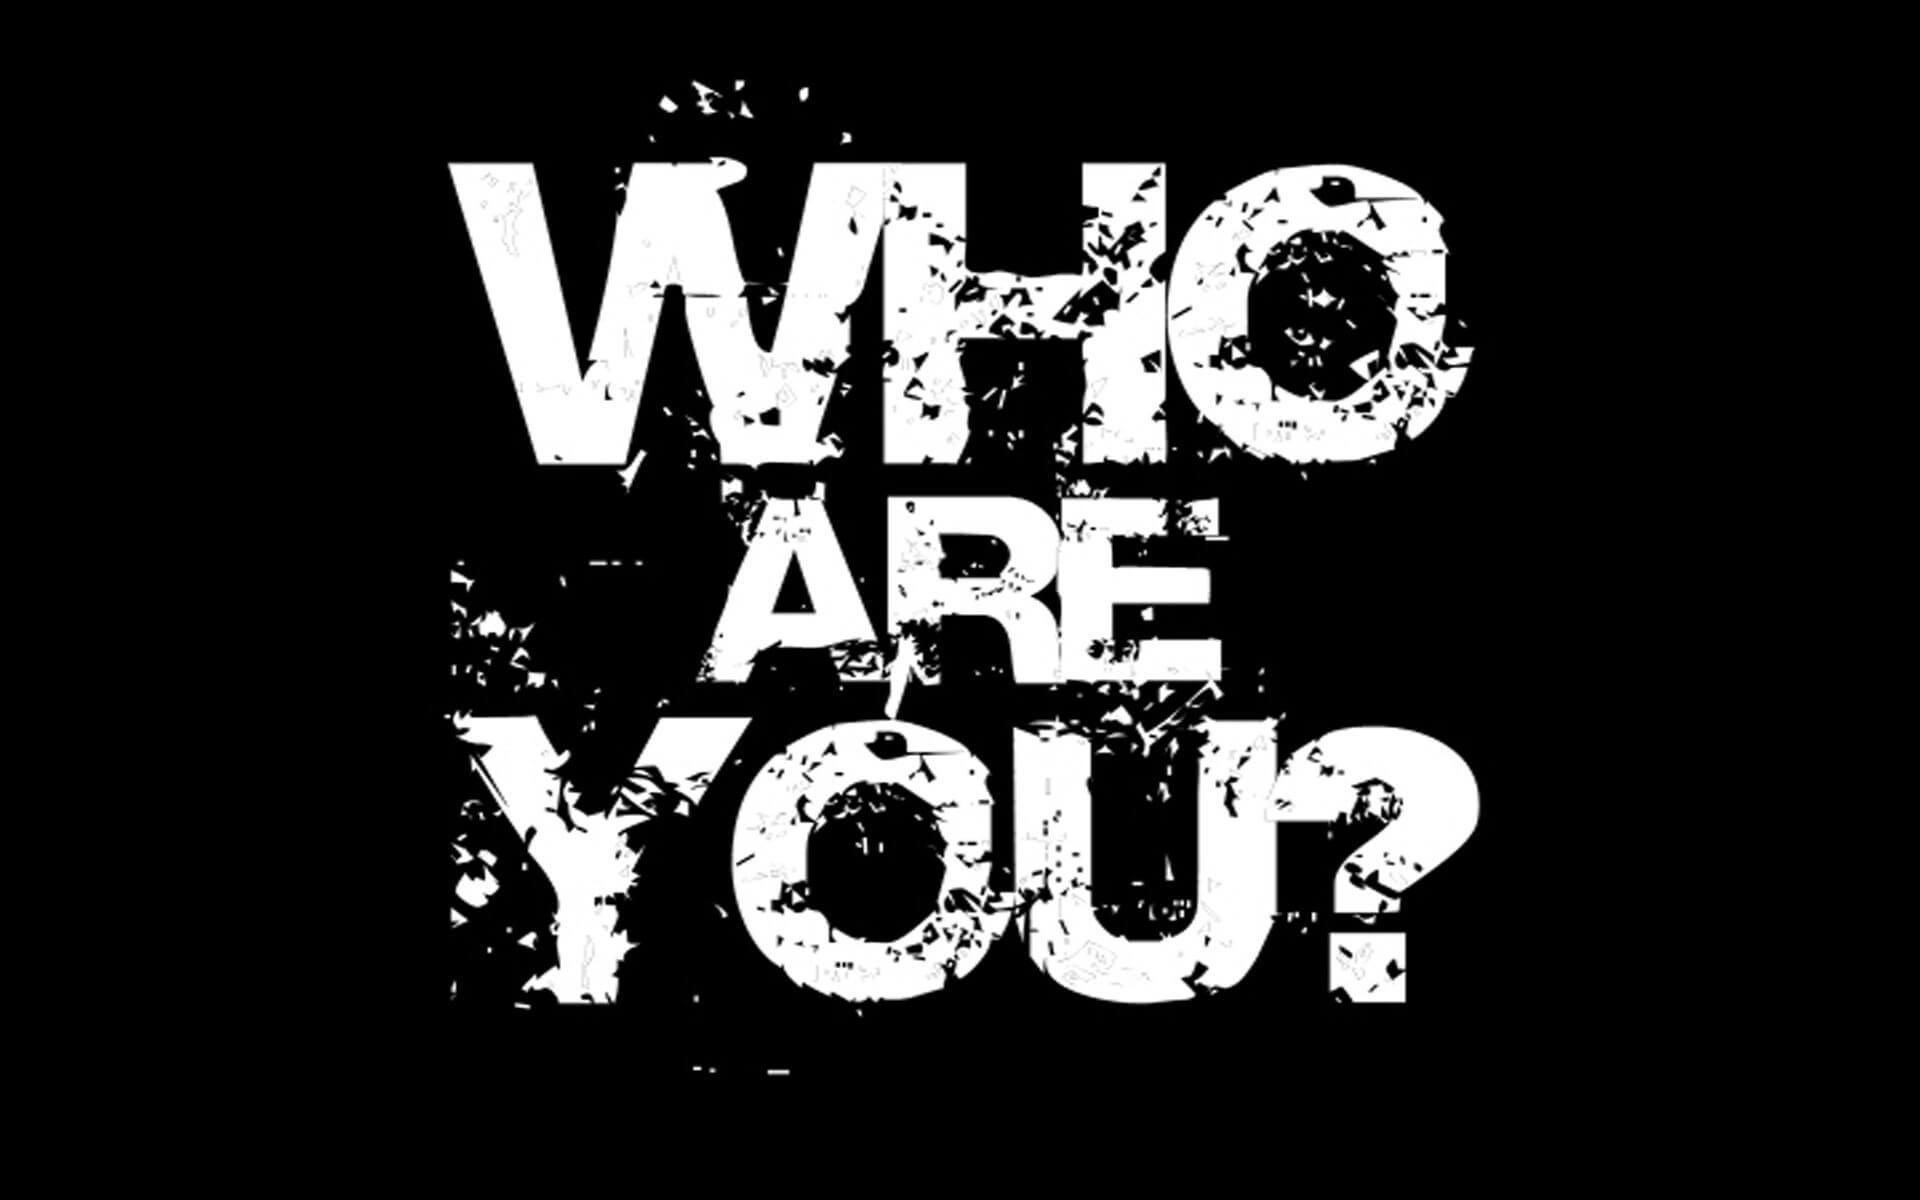 Identity: who are you